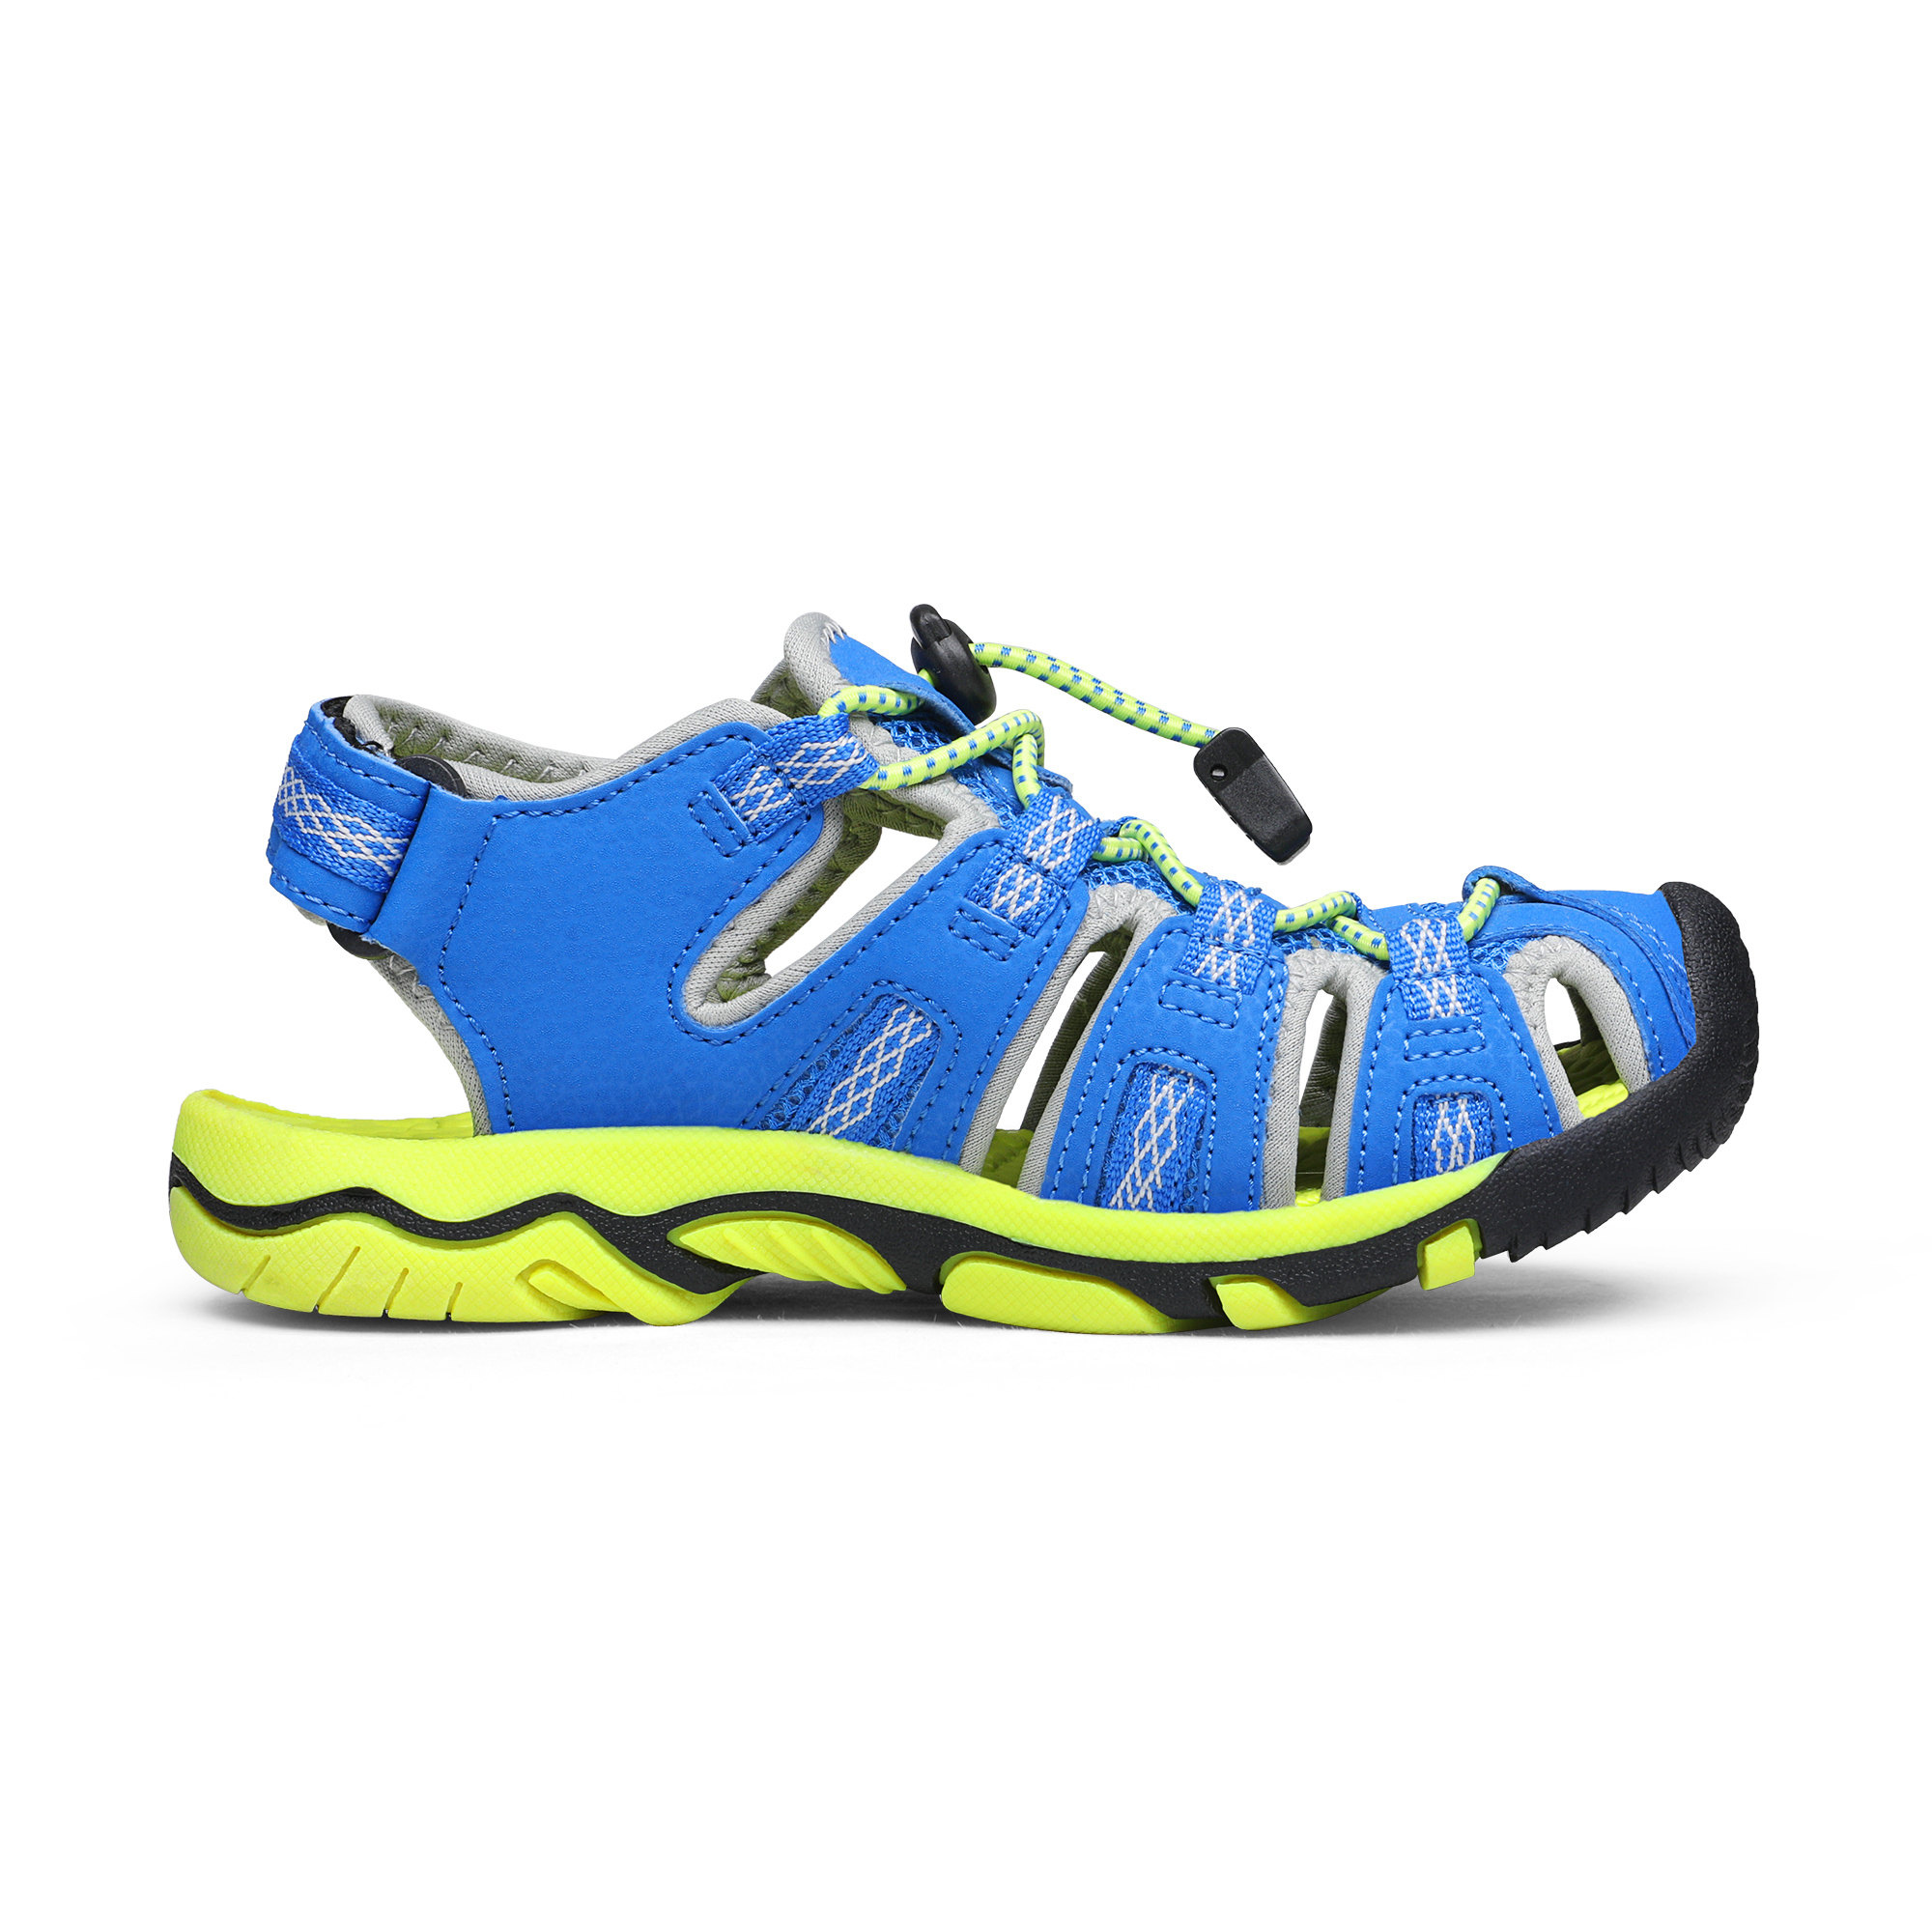 Dream Pairs Kids Summer Athletic Sandals Boys Girls School Outdoor Sports Sandals Walking Shoes 160912-K ROYAL/BLUE/GREY/NEON/GREEN Size 9 - image 2 of 5